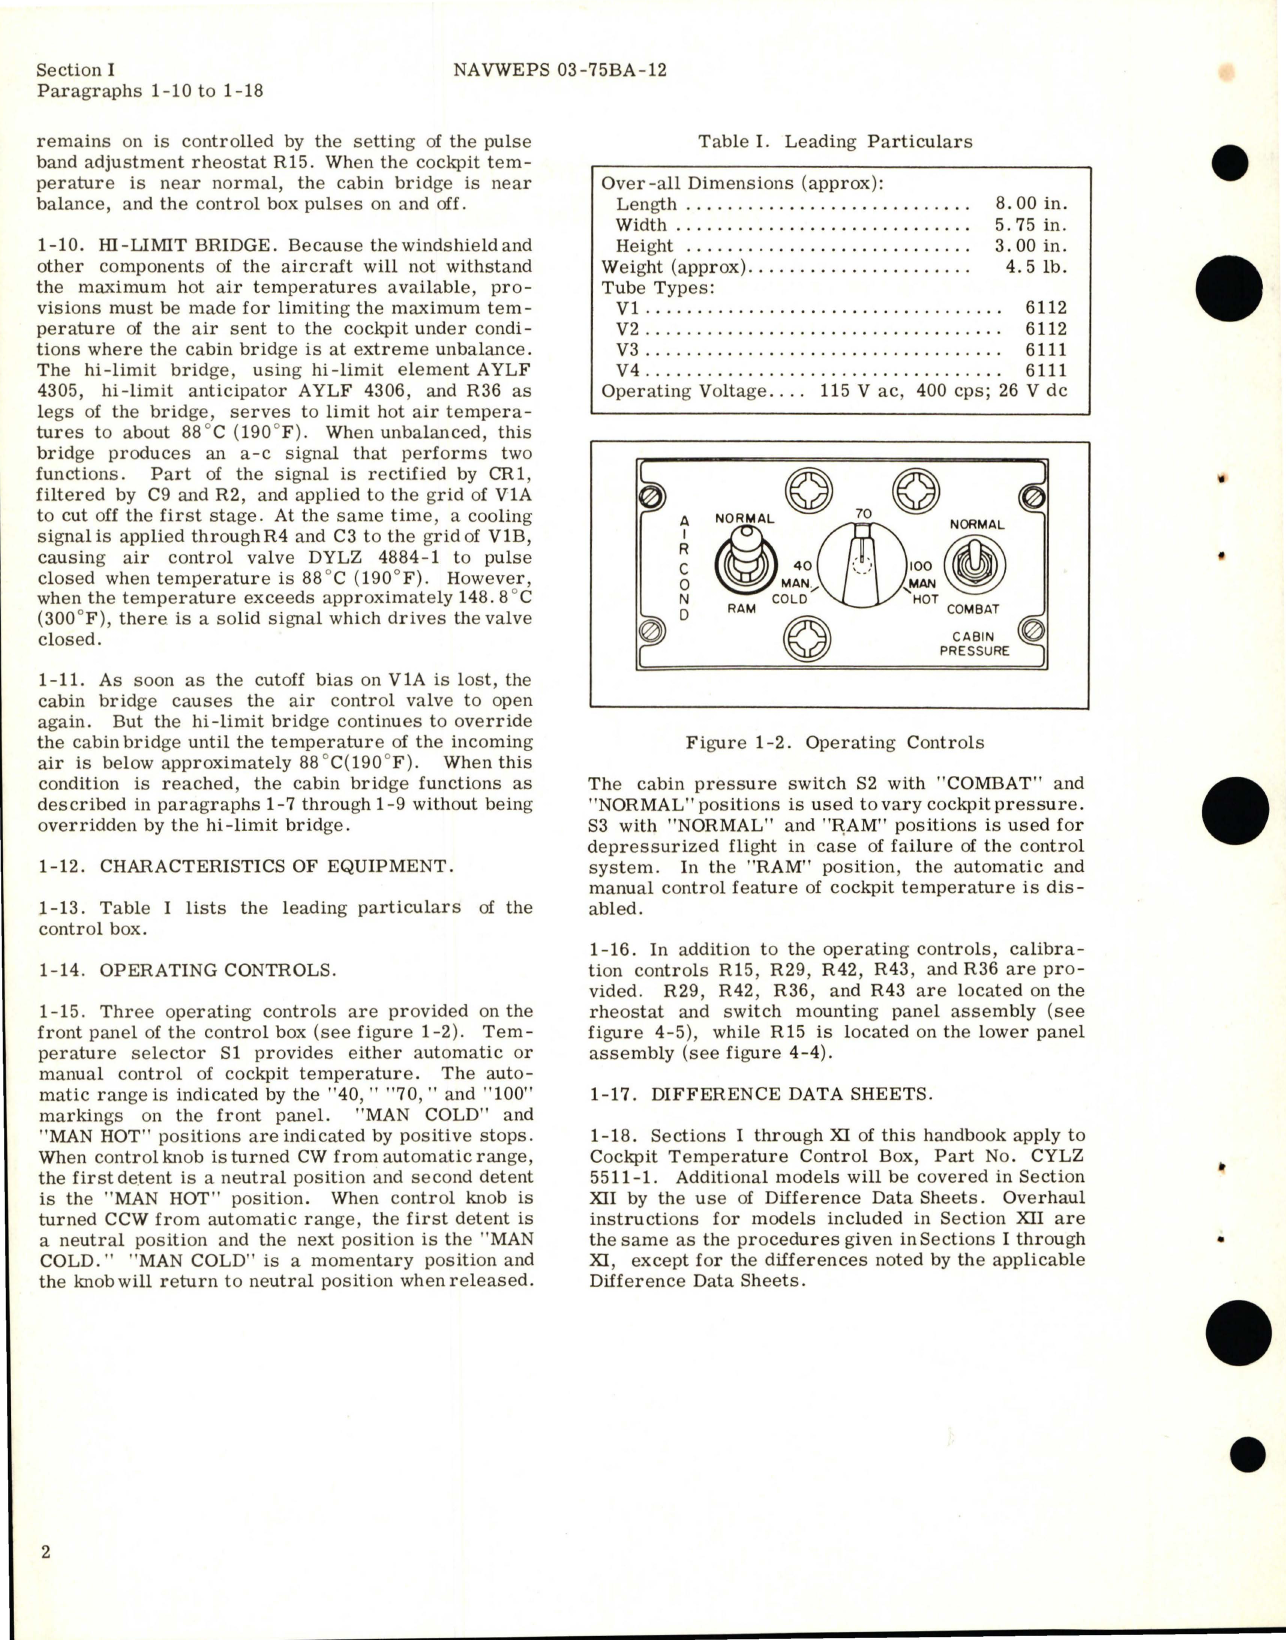 Sample page 6 from AirCorps Library document: Overhaul Instructions for Control Box Cockpit Temperature - Part CYLZ 5511-1 